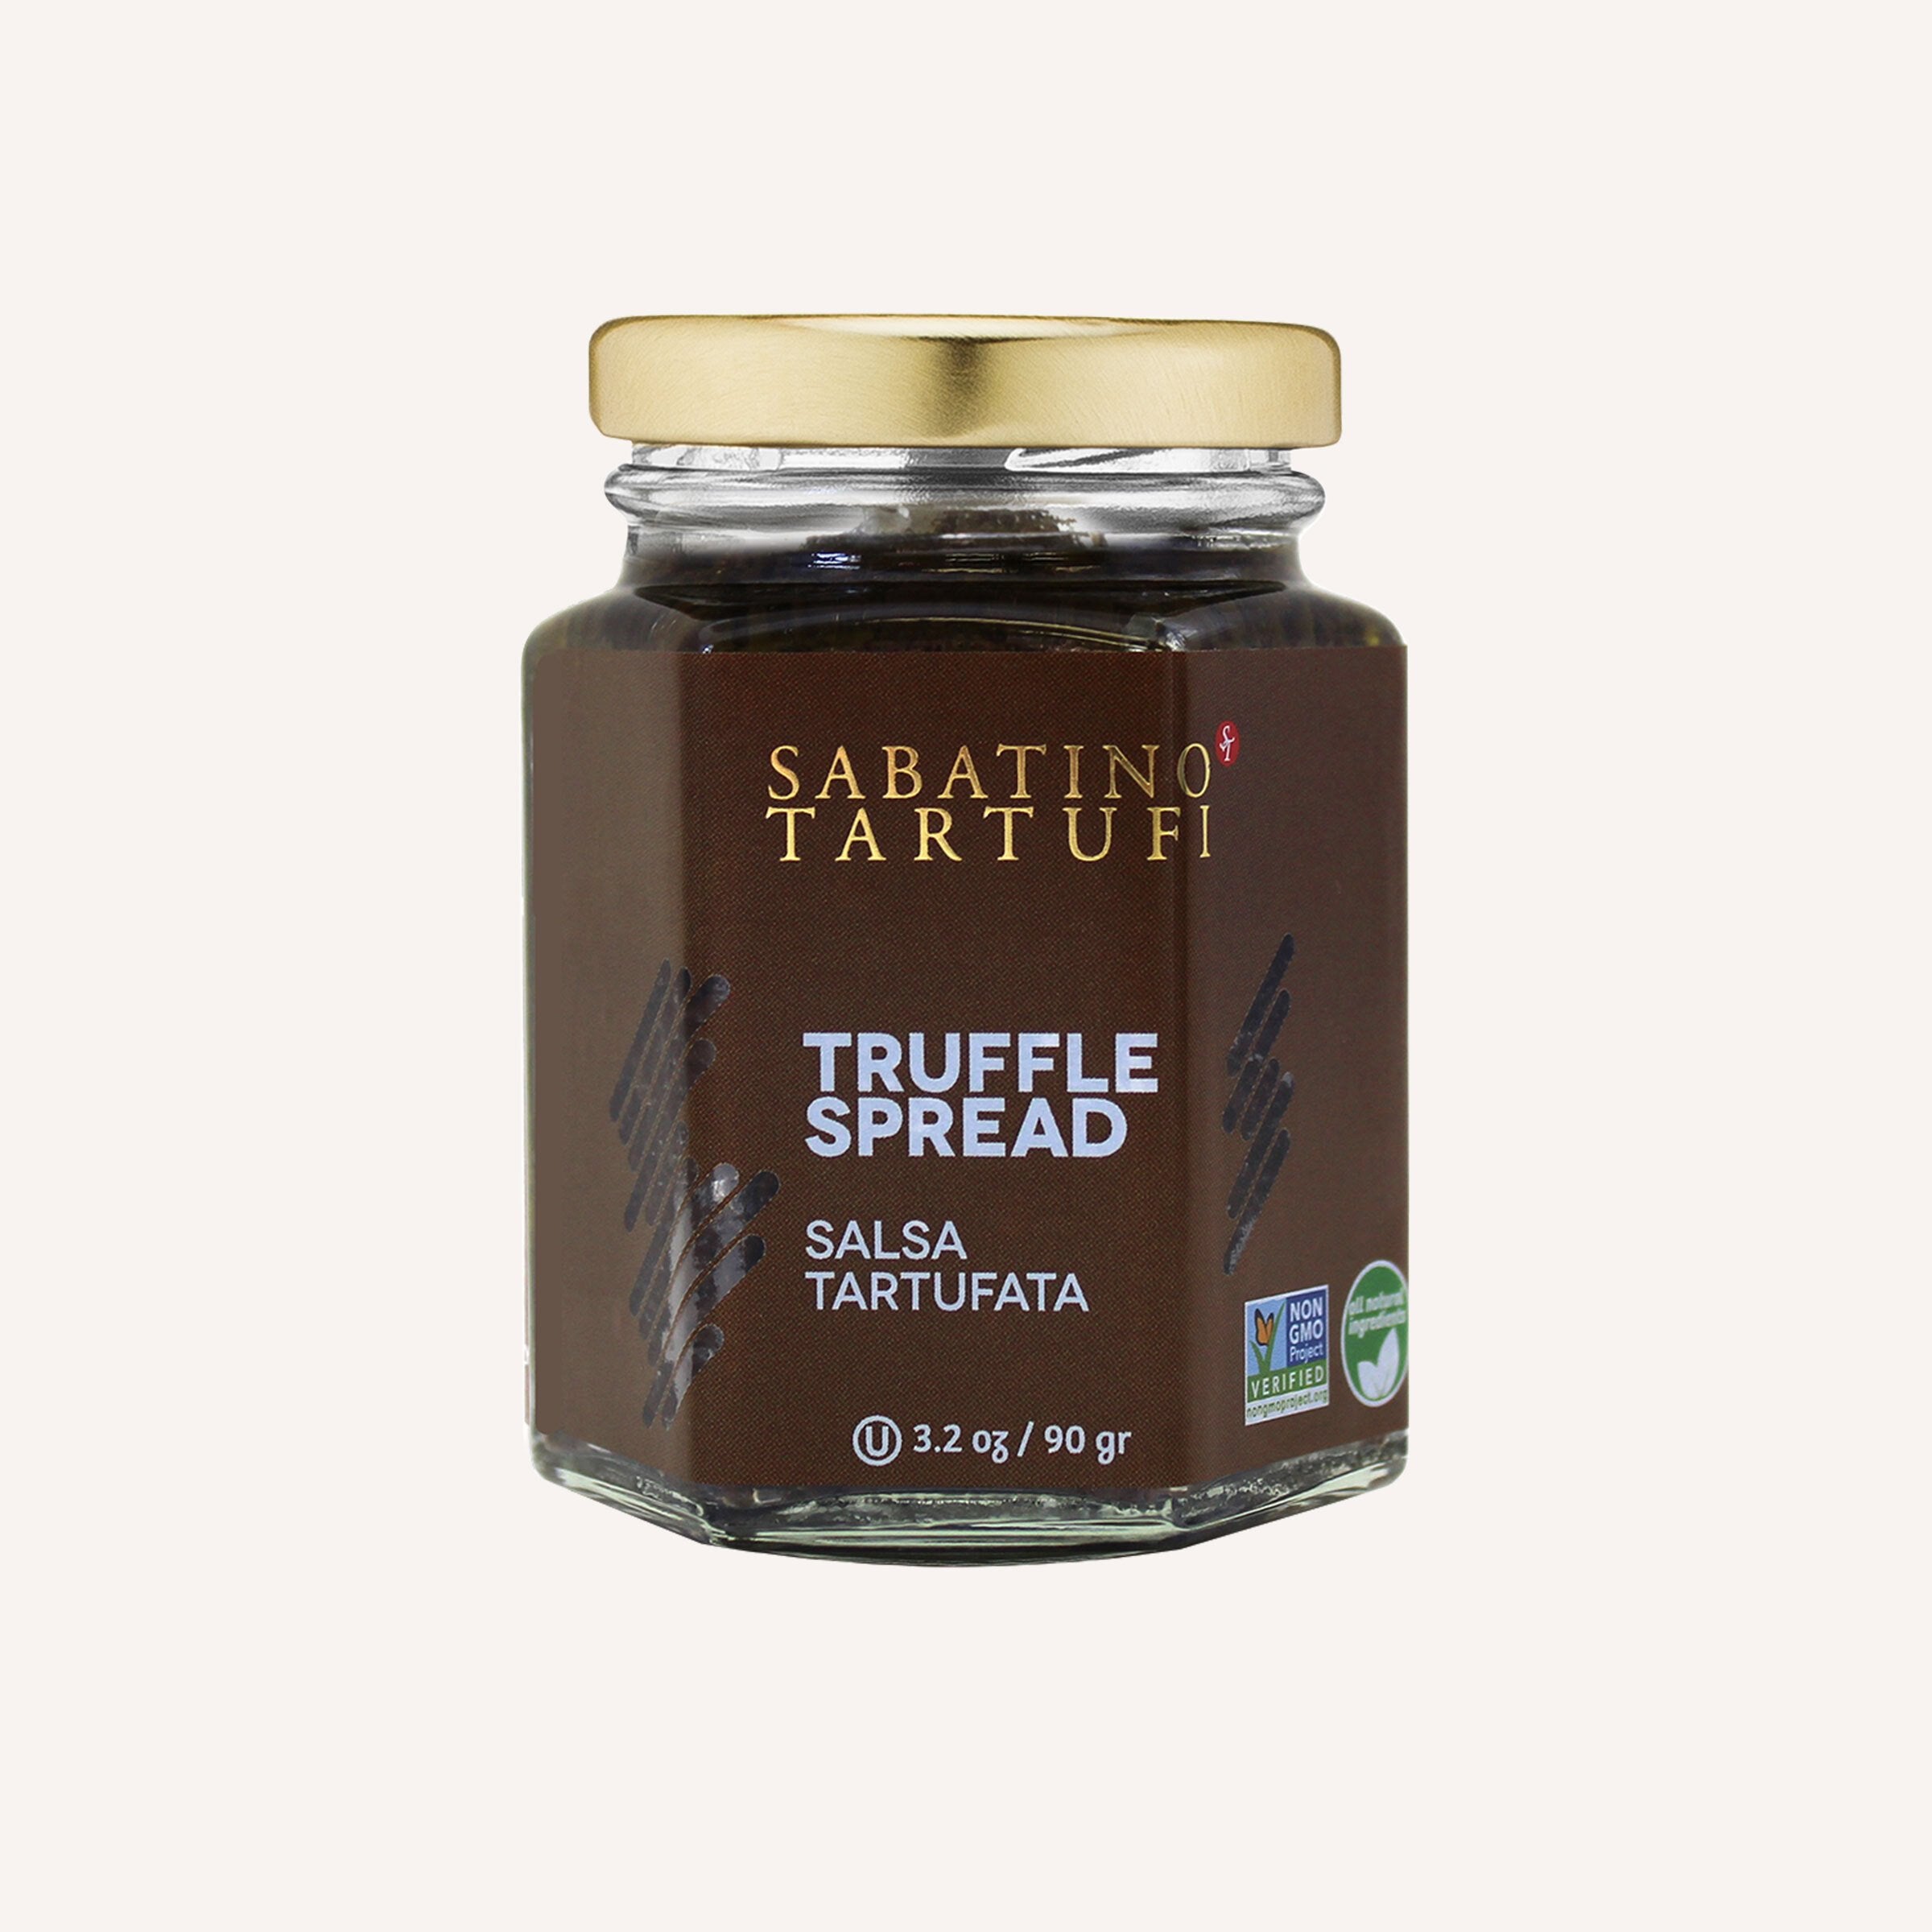 Truffle Spread - 3.2 oz <br> Case Pack 6 Units